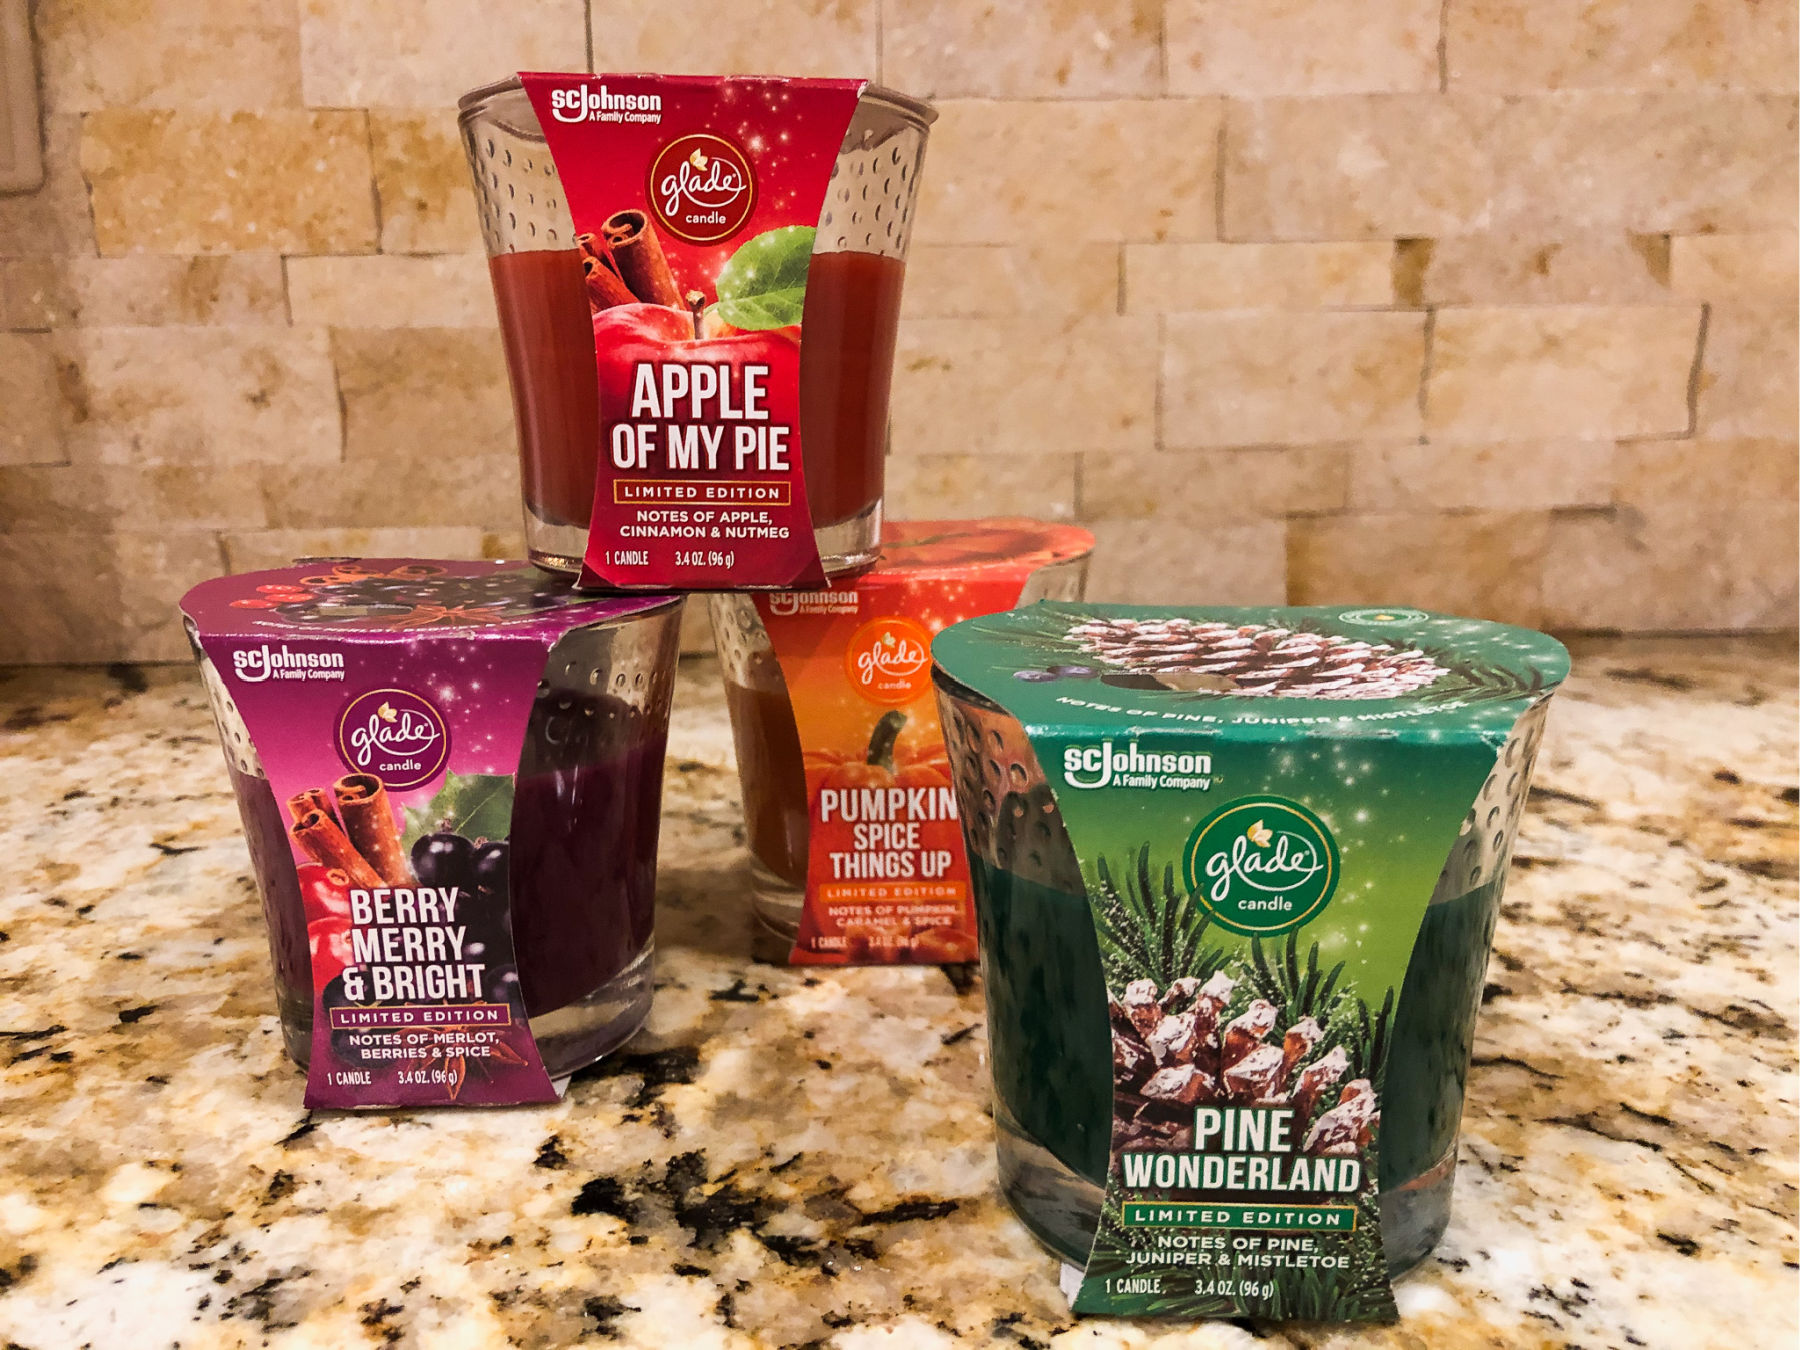 Be On The Look Out For The Glade® Holiday Limited Edition Scents For 2020 on I Heart Publix